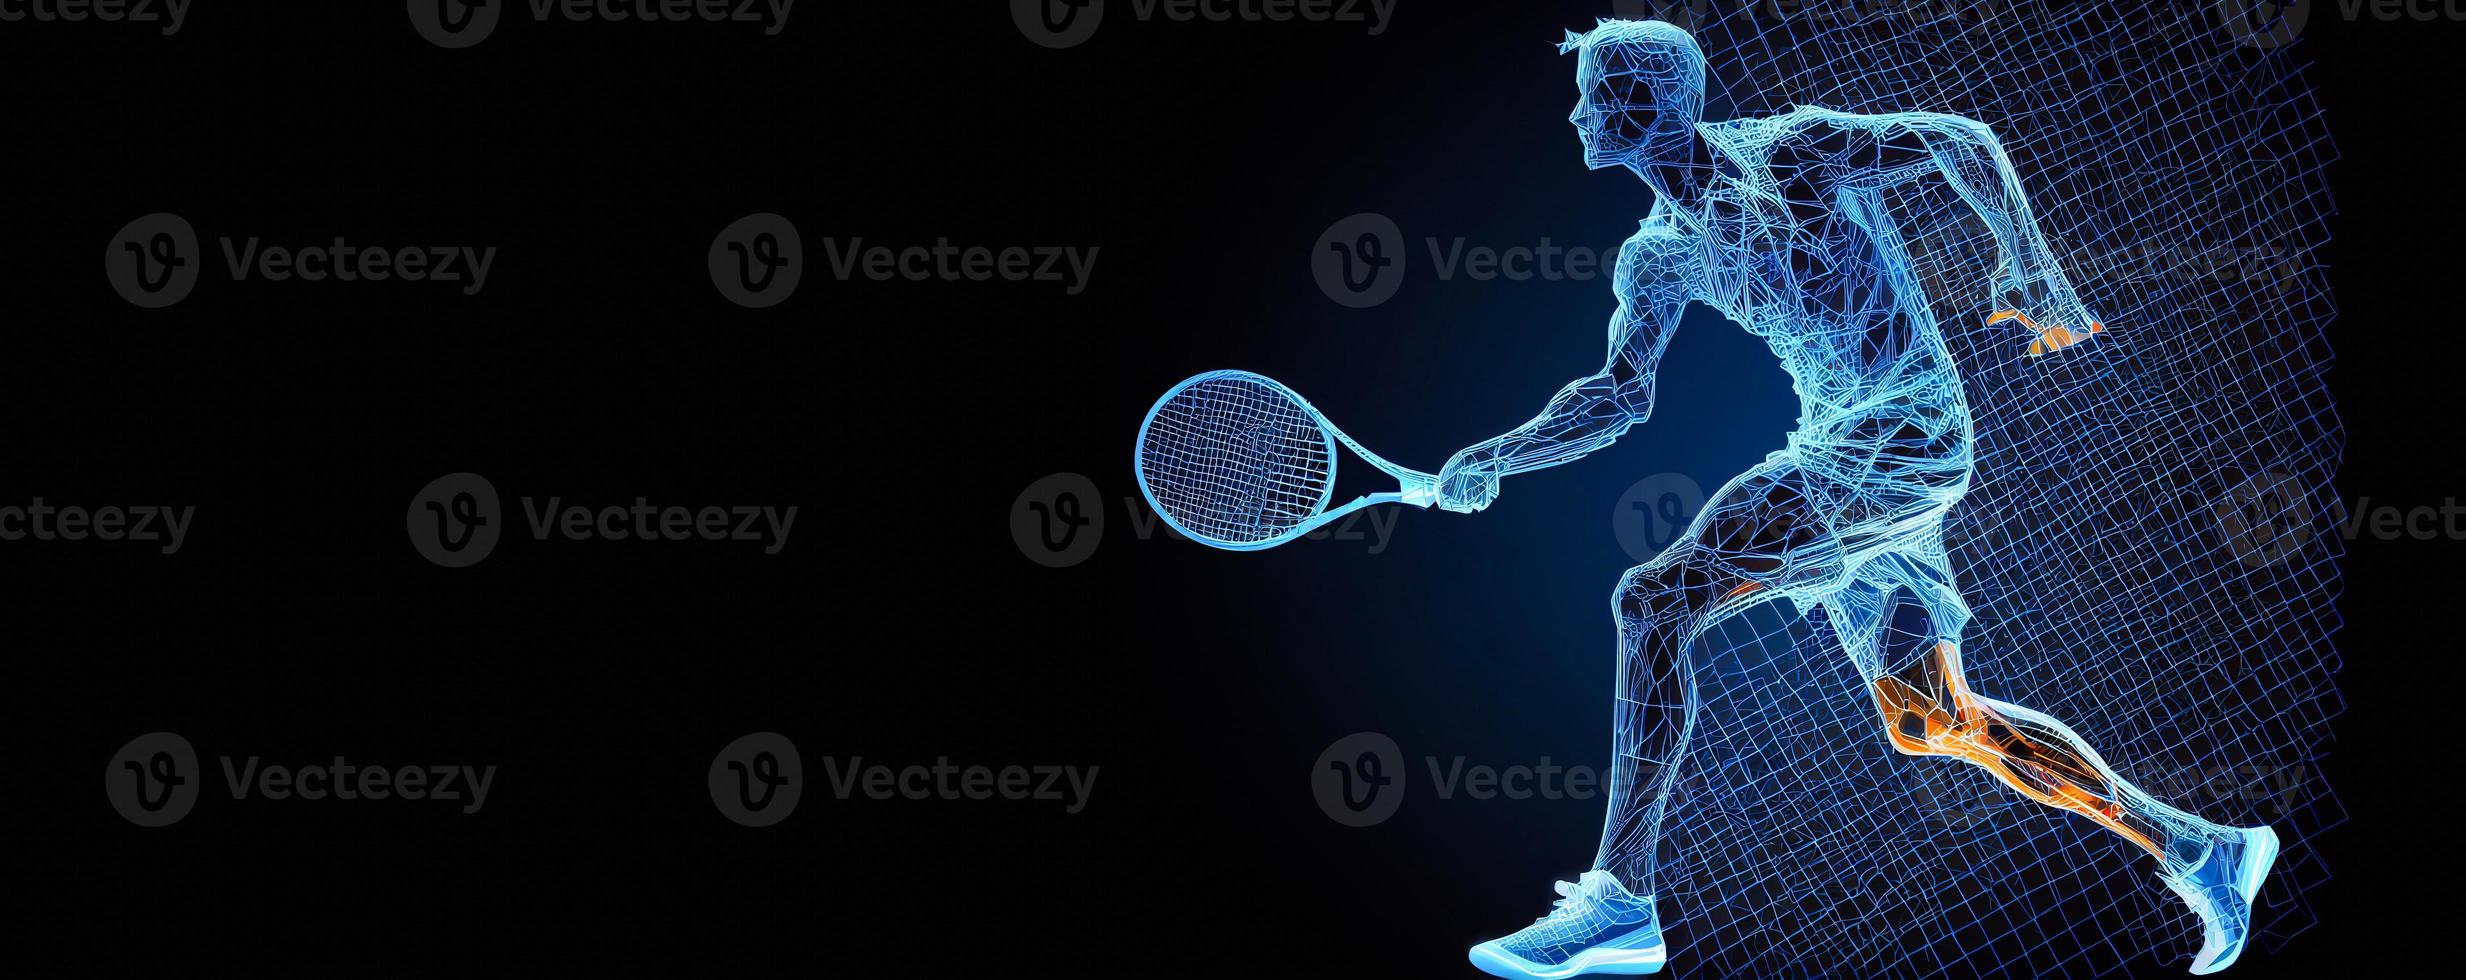 Abstract silhouette of a tennis player on blue background. Tennis player man with racket hits the ball. illustration AI photo